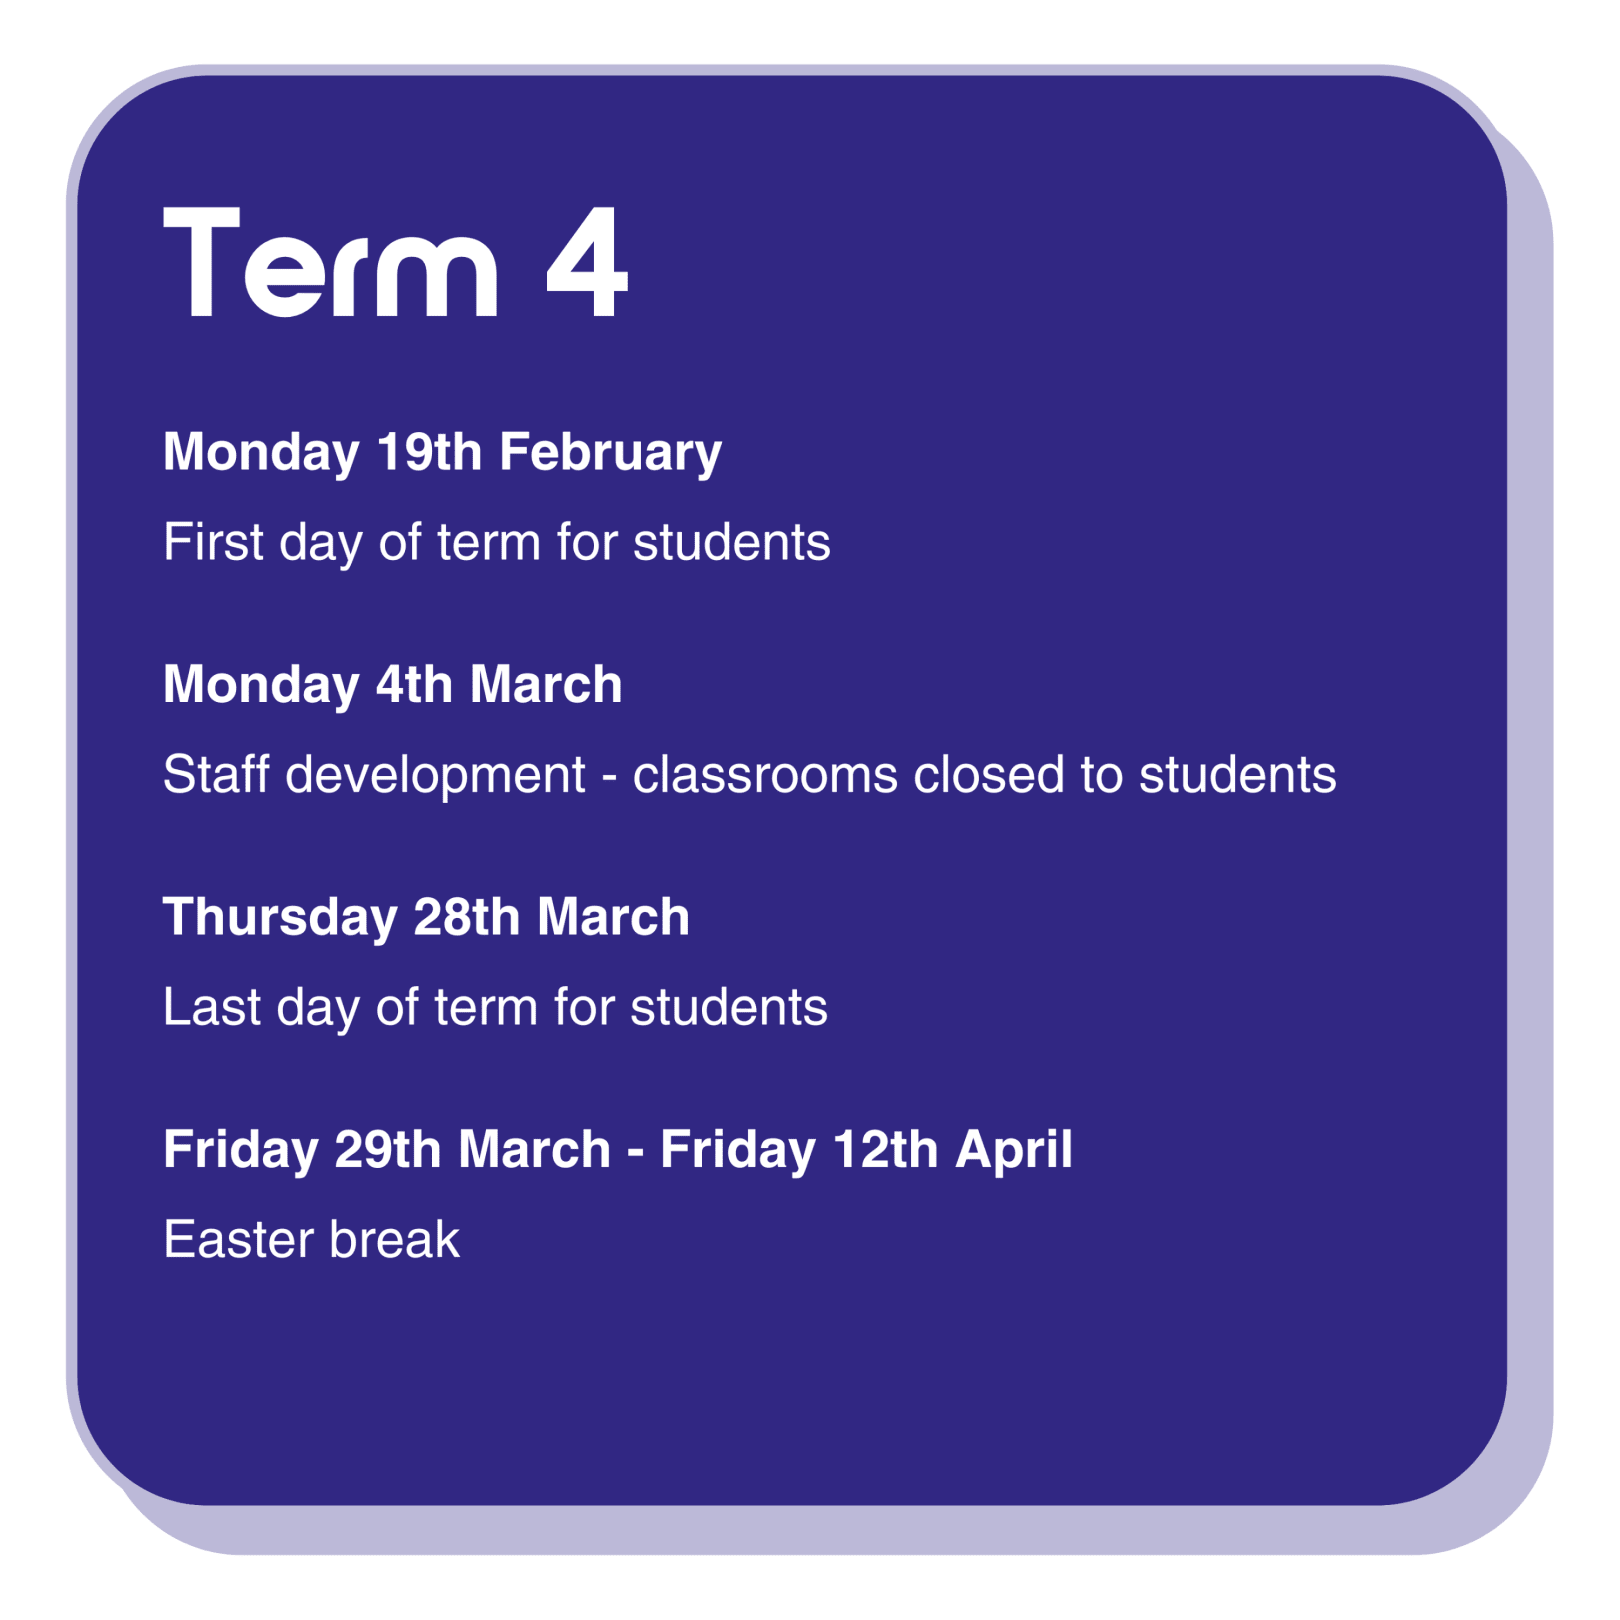  Term 4 dates information infographic with the following text:  Monday 19th February is the first day of term for students. Monday 4th March Is a staff development day, classrooms are closed to students. Thursday 28th March is the last day of term for students. Friday 29th March - Friday 12th April is the Easter break.